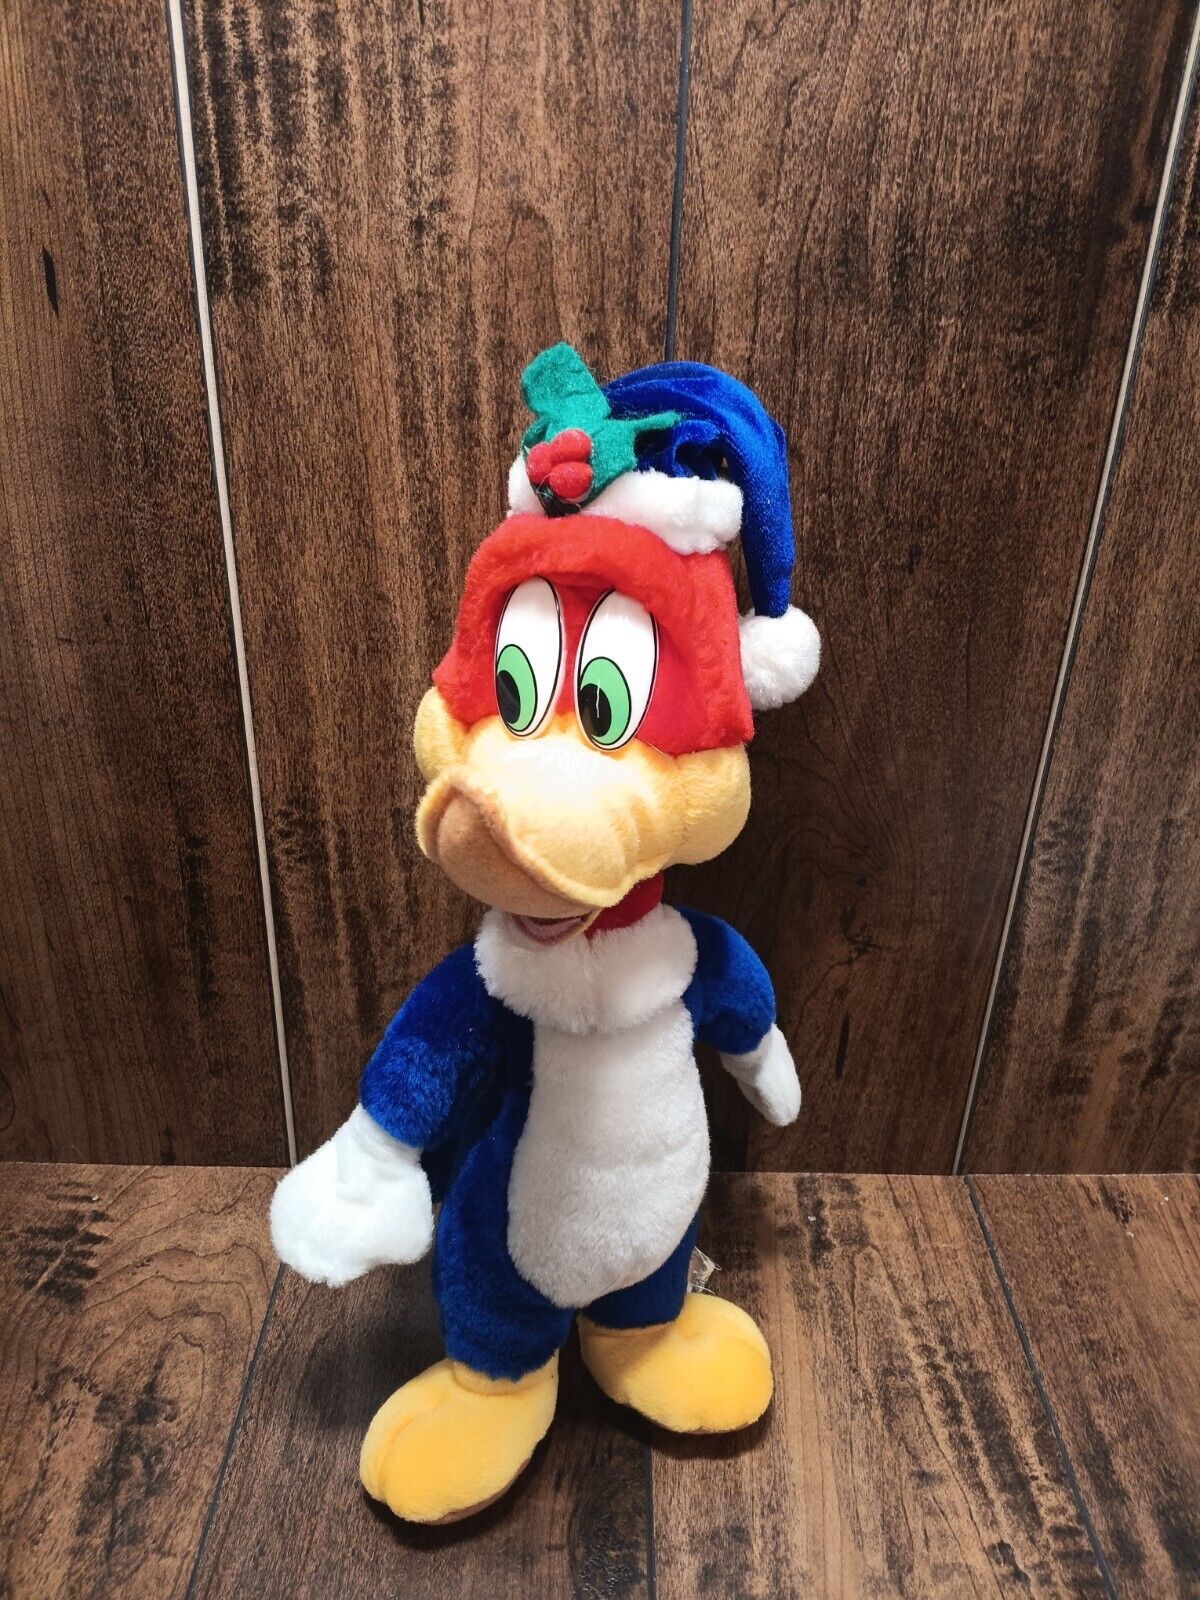 2000 Woody Wood Pecker the toy network plush 